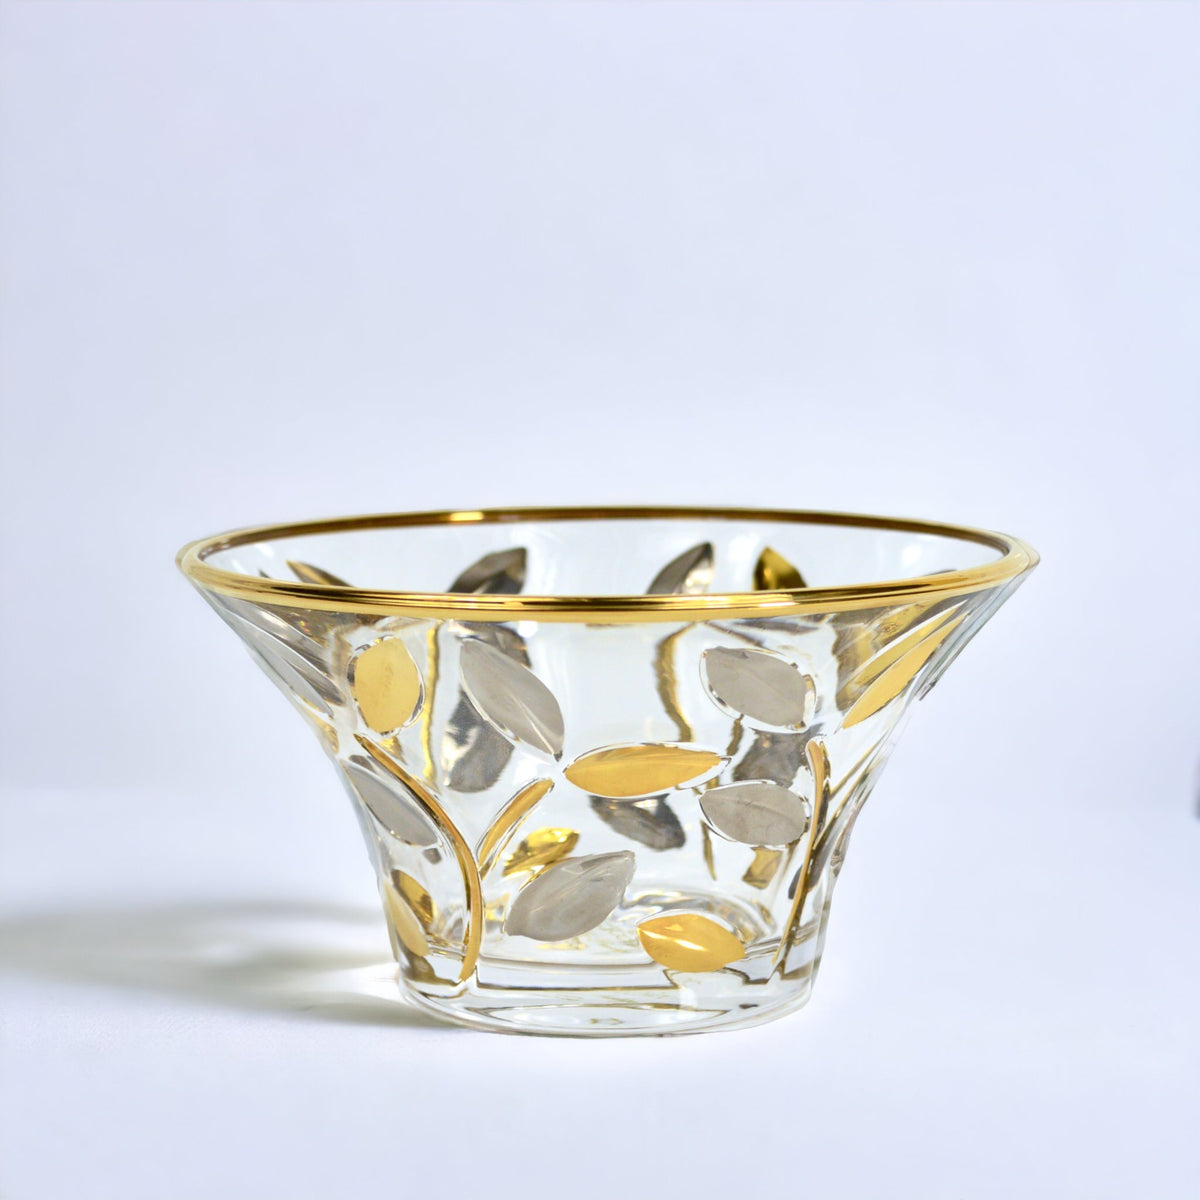 Flowervine Candy Bowl, Hand Painted Platinum and Gold - My Italian Decor